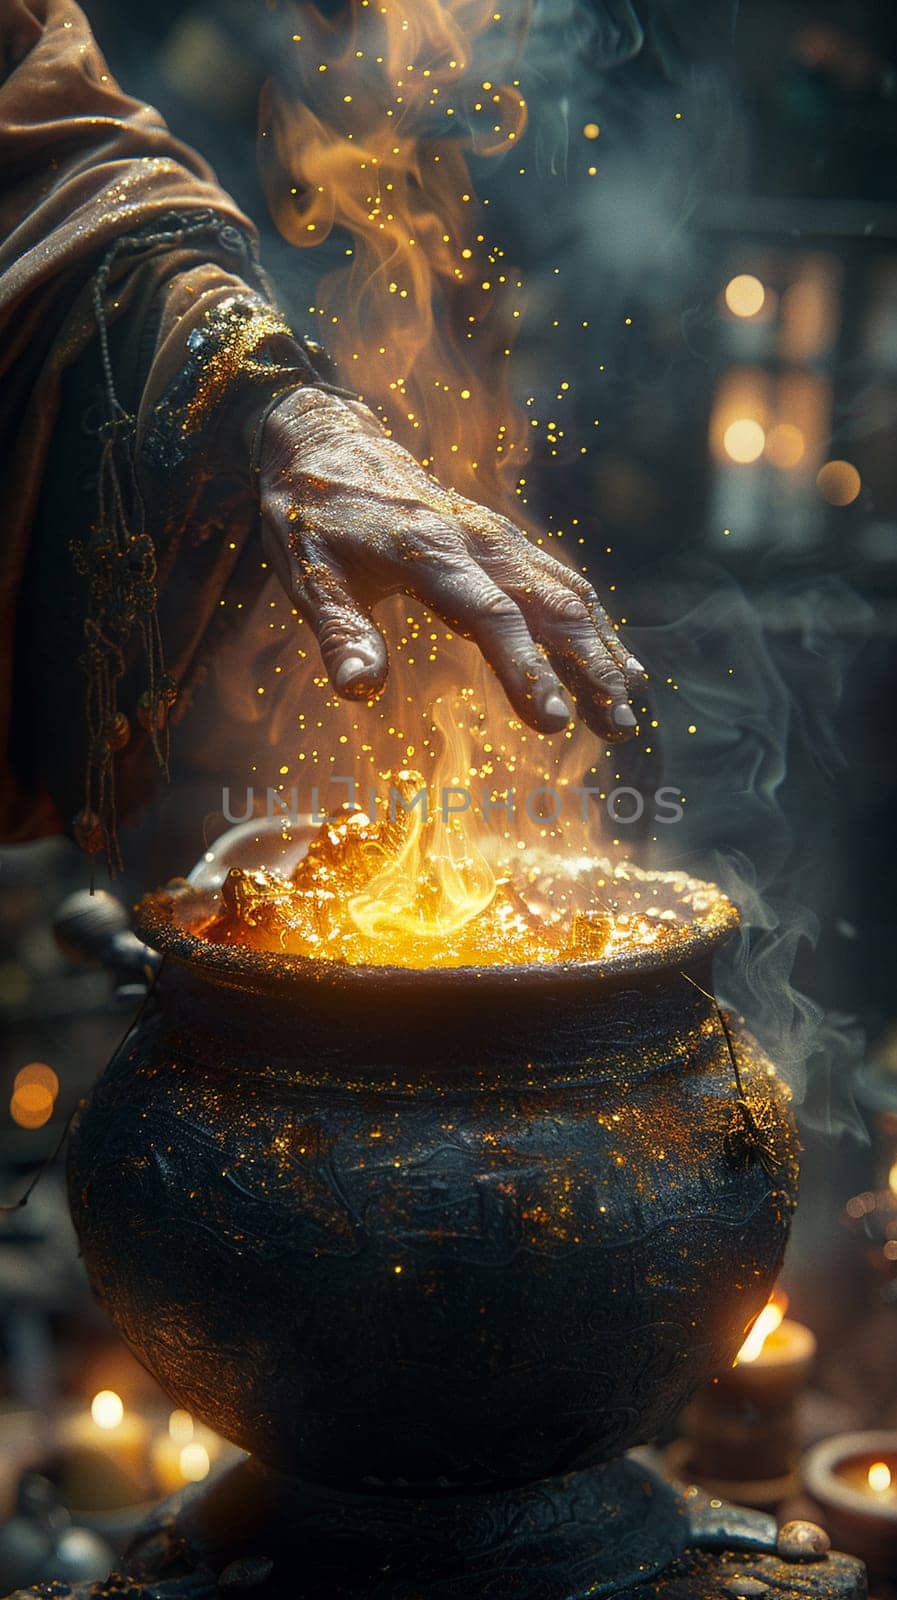 Witch's hands over a bubbling cauldron, illustrated with magical effects and a spooky ambiance.